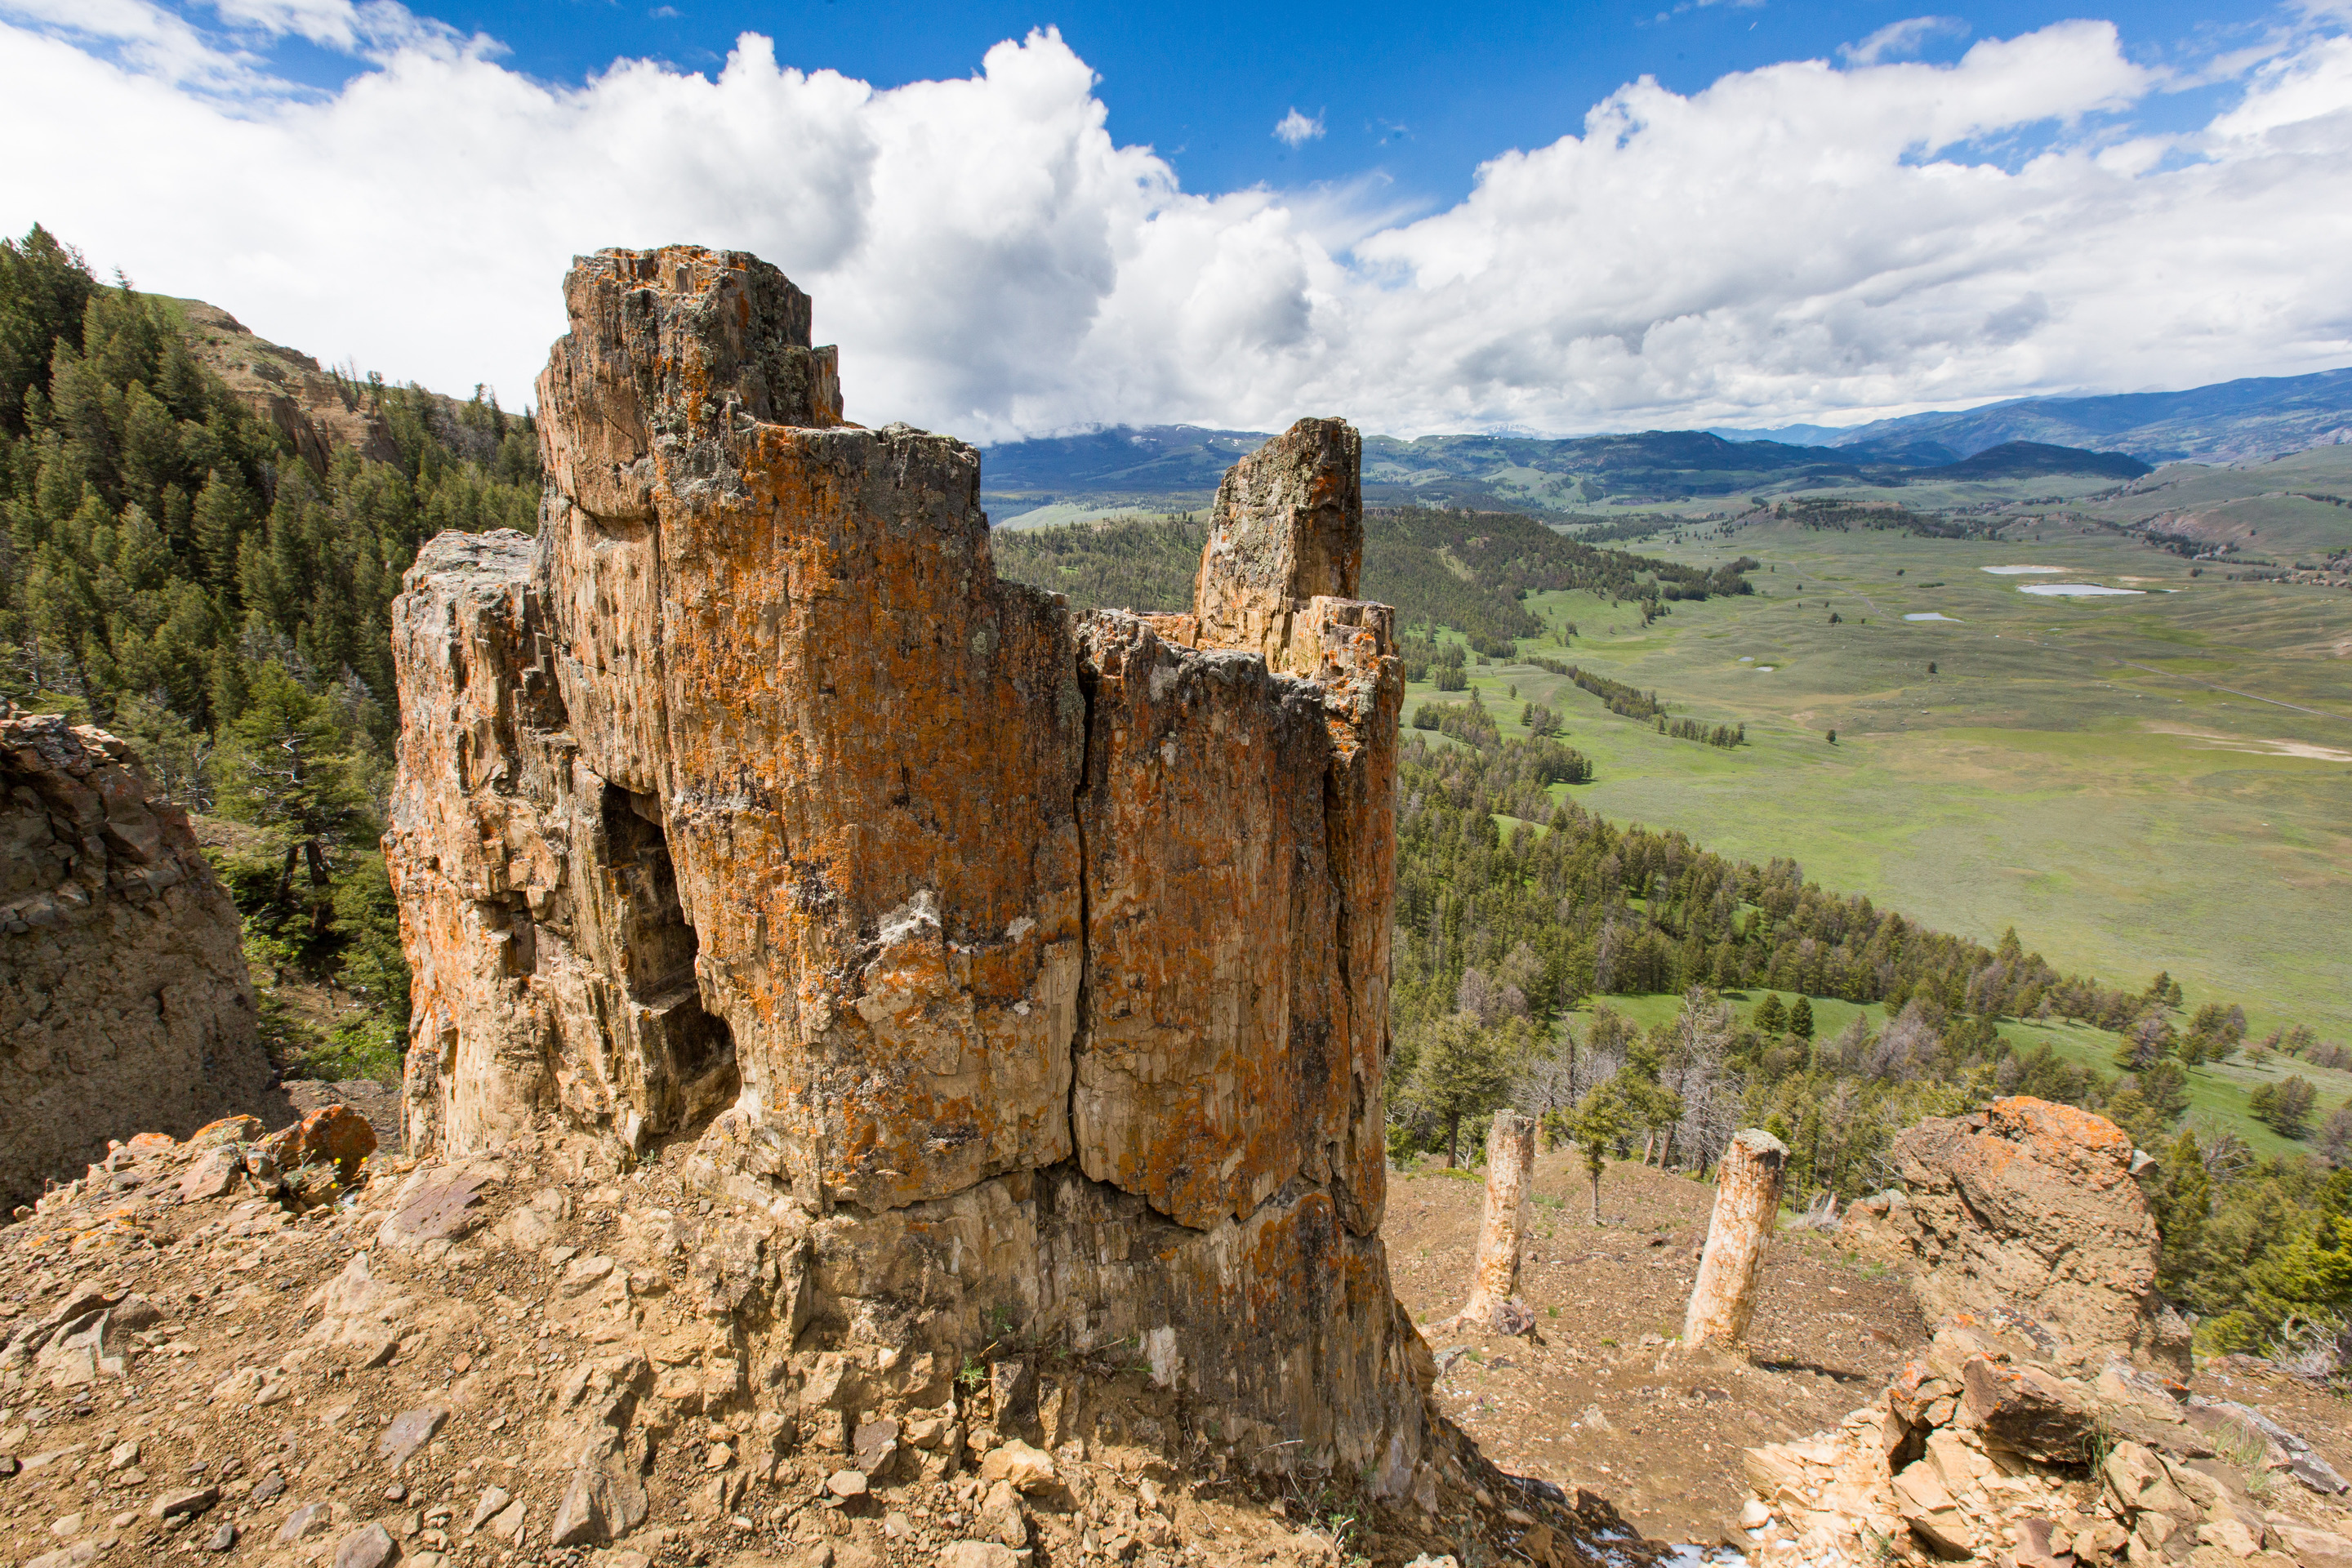 Petrified tree trunks standing upright on the side of a ridge overlooking an open valley